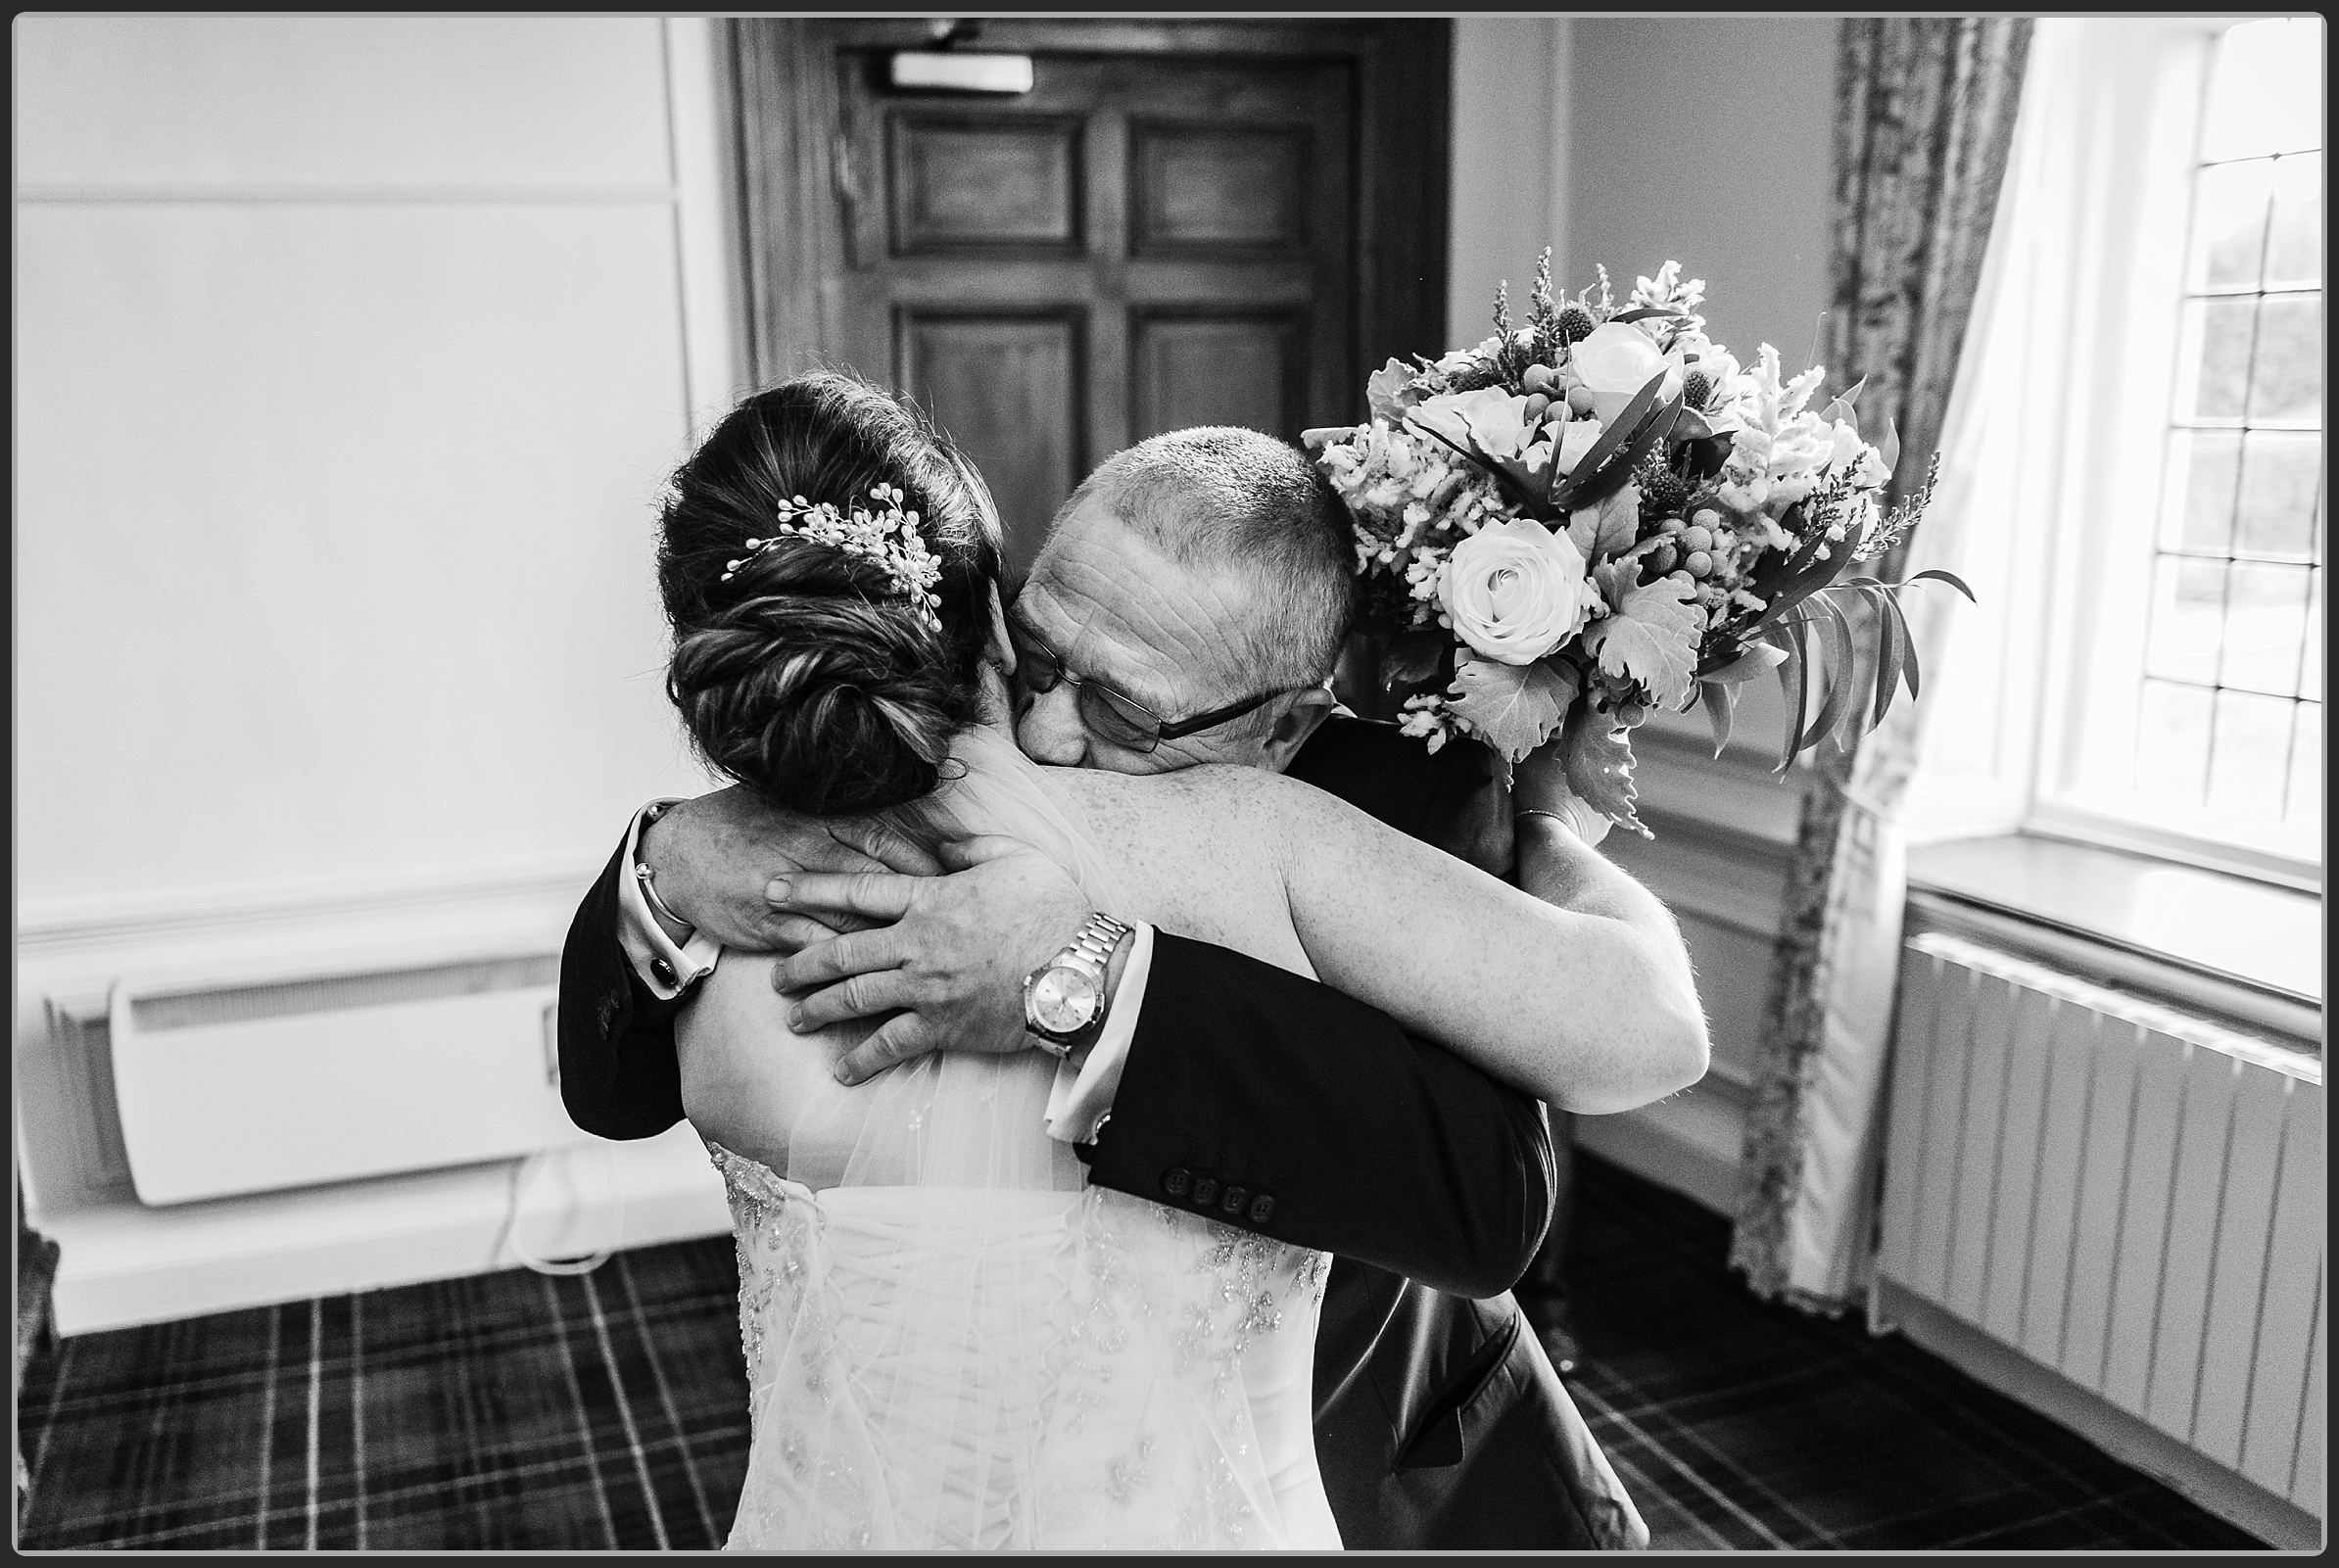 The bride and her dad share a hug